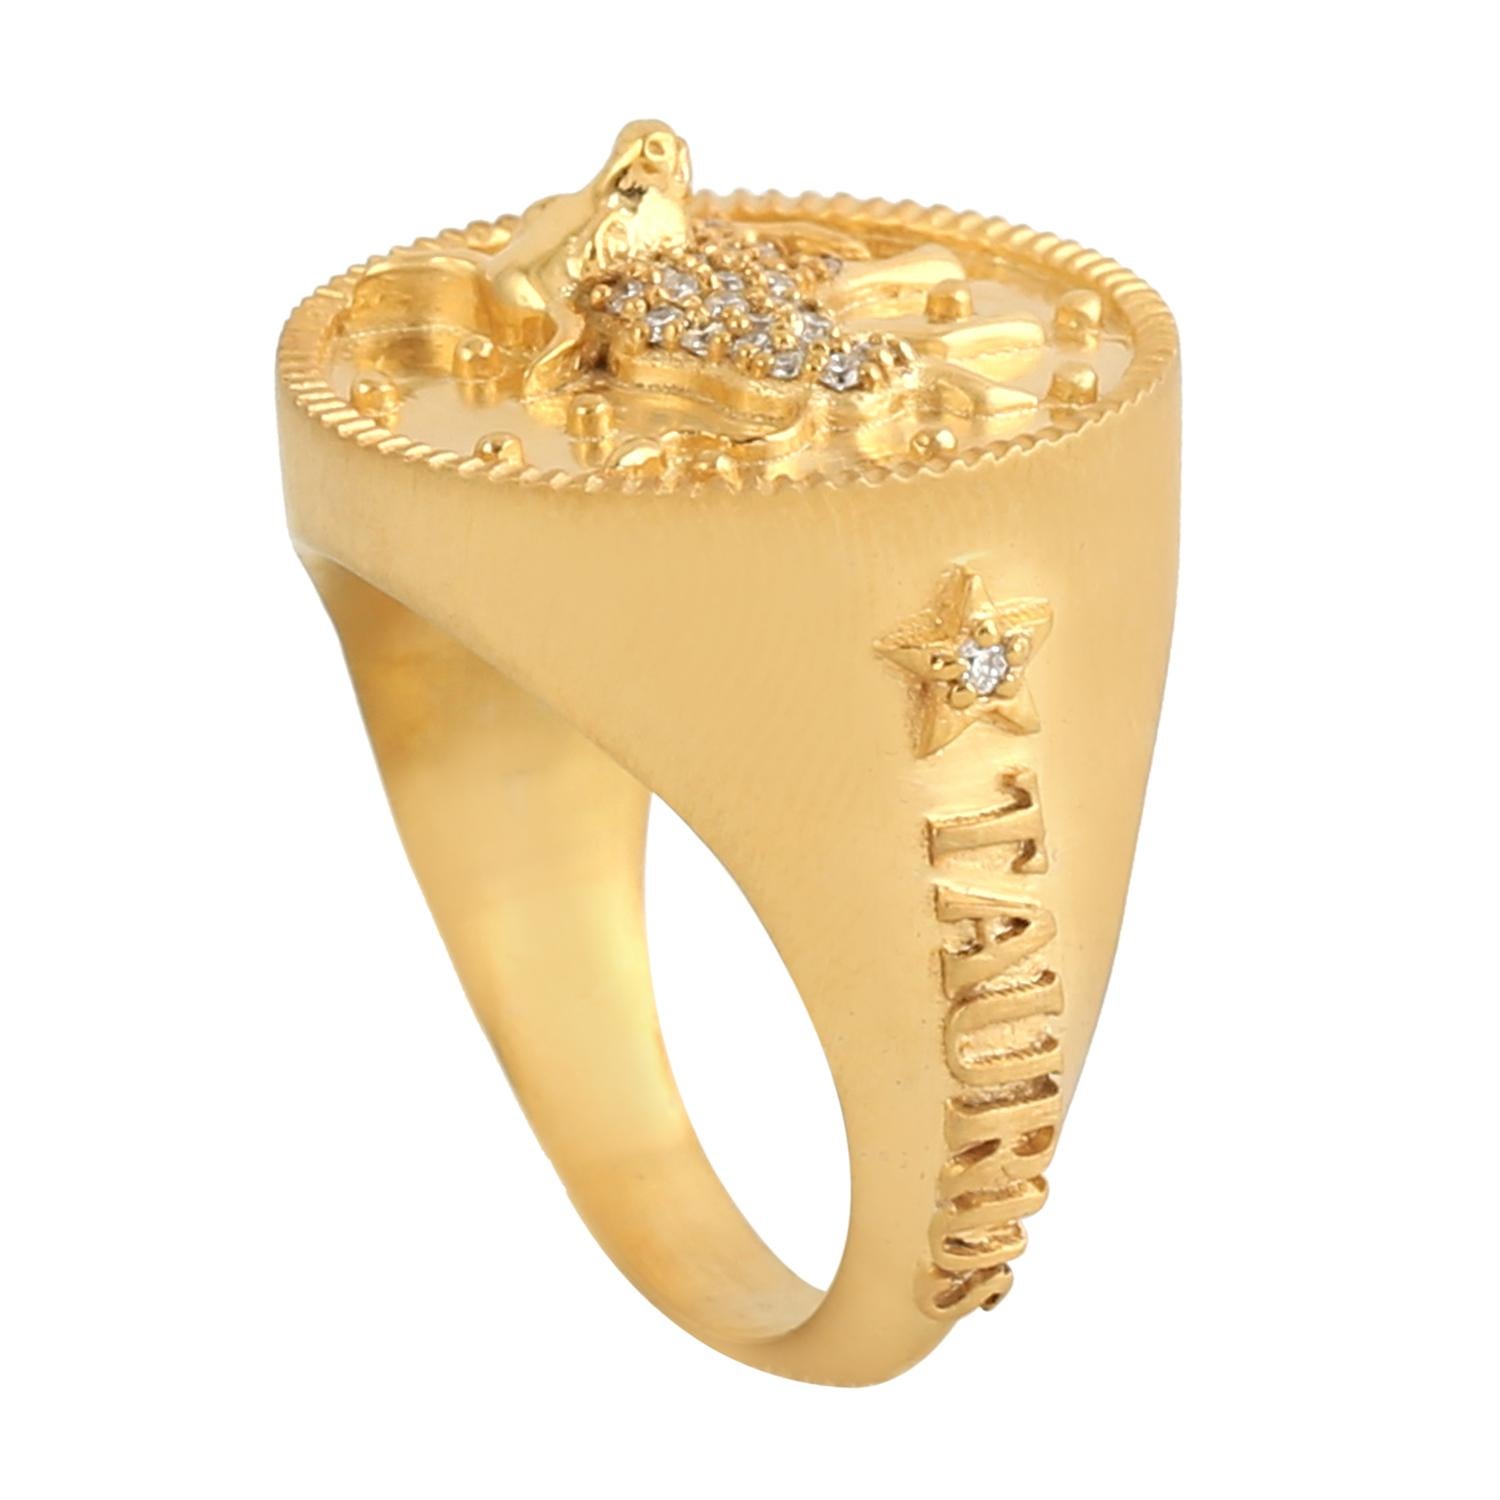 Women's Taurus Zodiac Ring With Pave Diamonds Made in 14k Yellow Gold For Sale